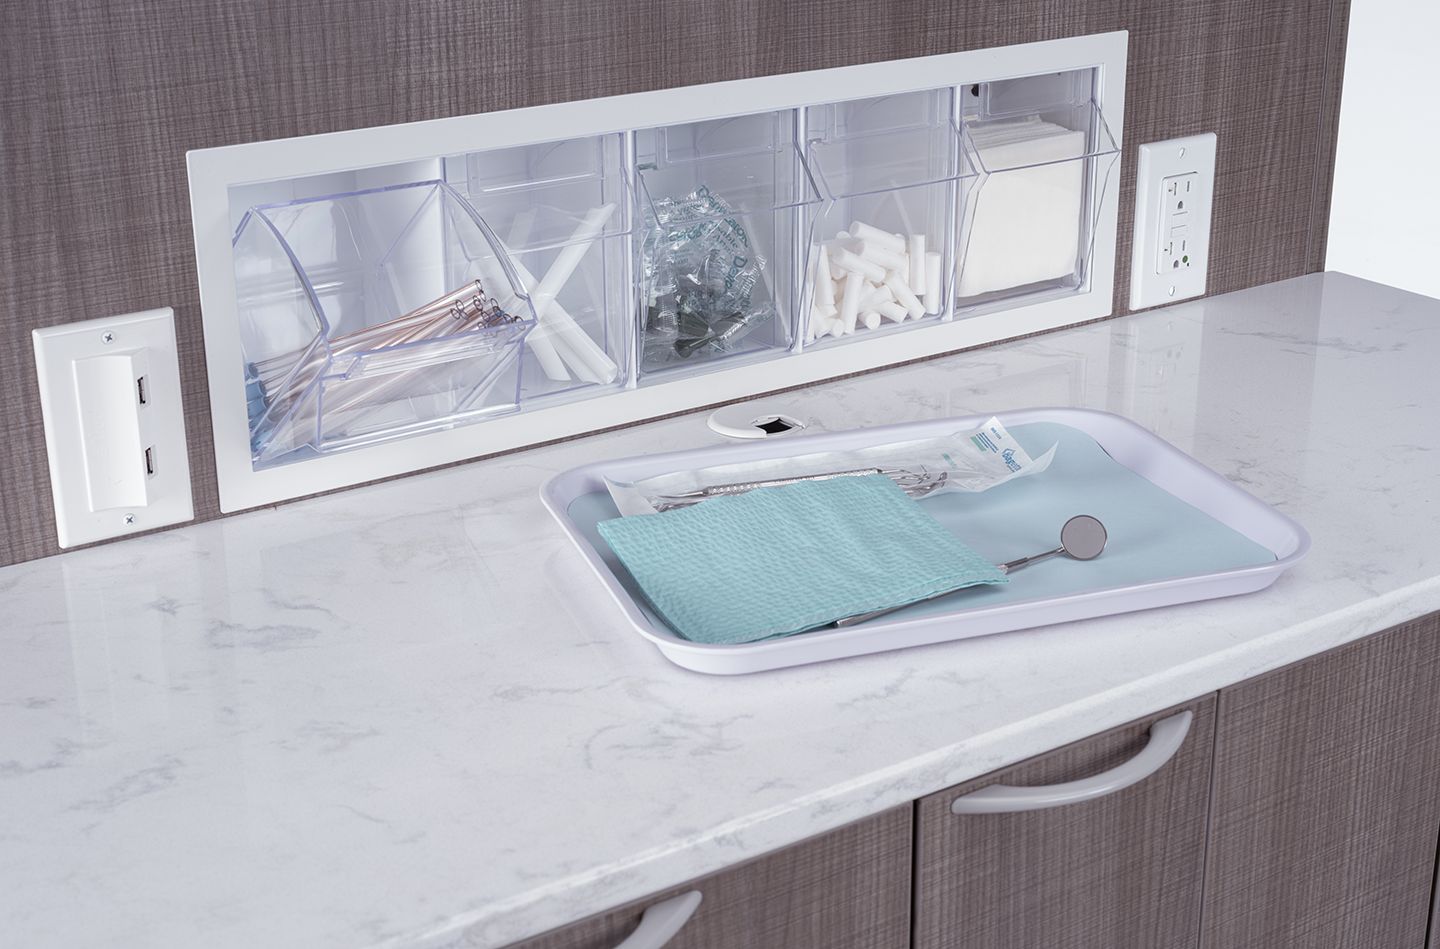 A-dec Inspire 391 hygiene console tip-out bins and countertop